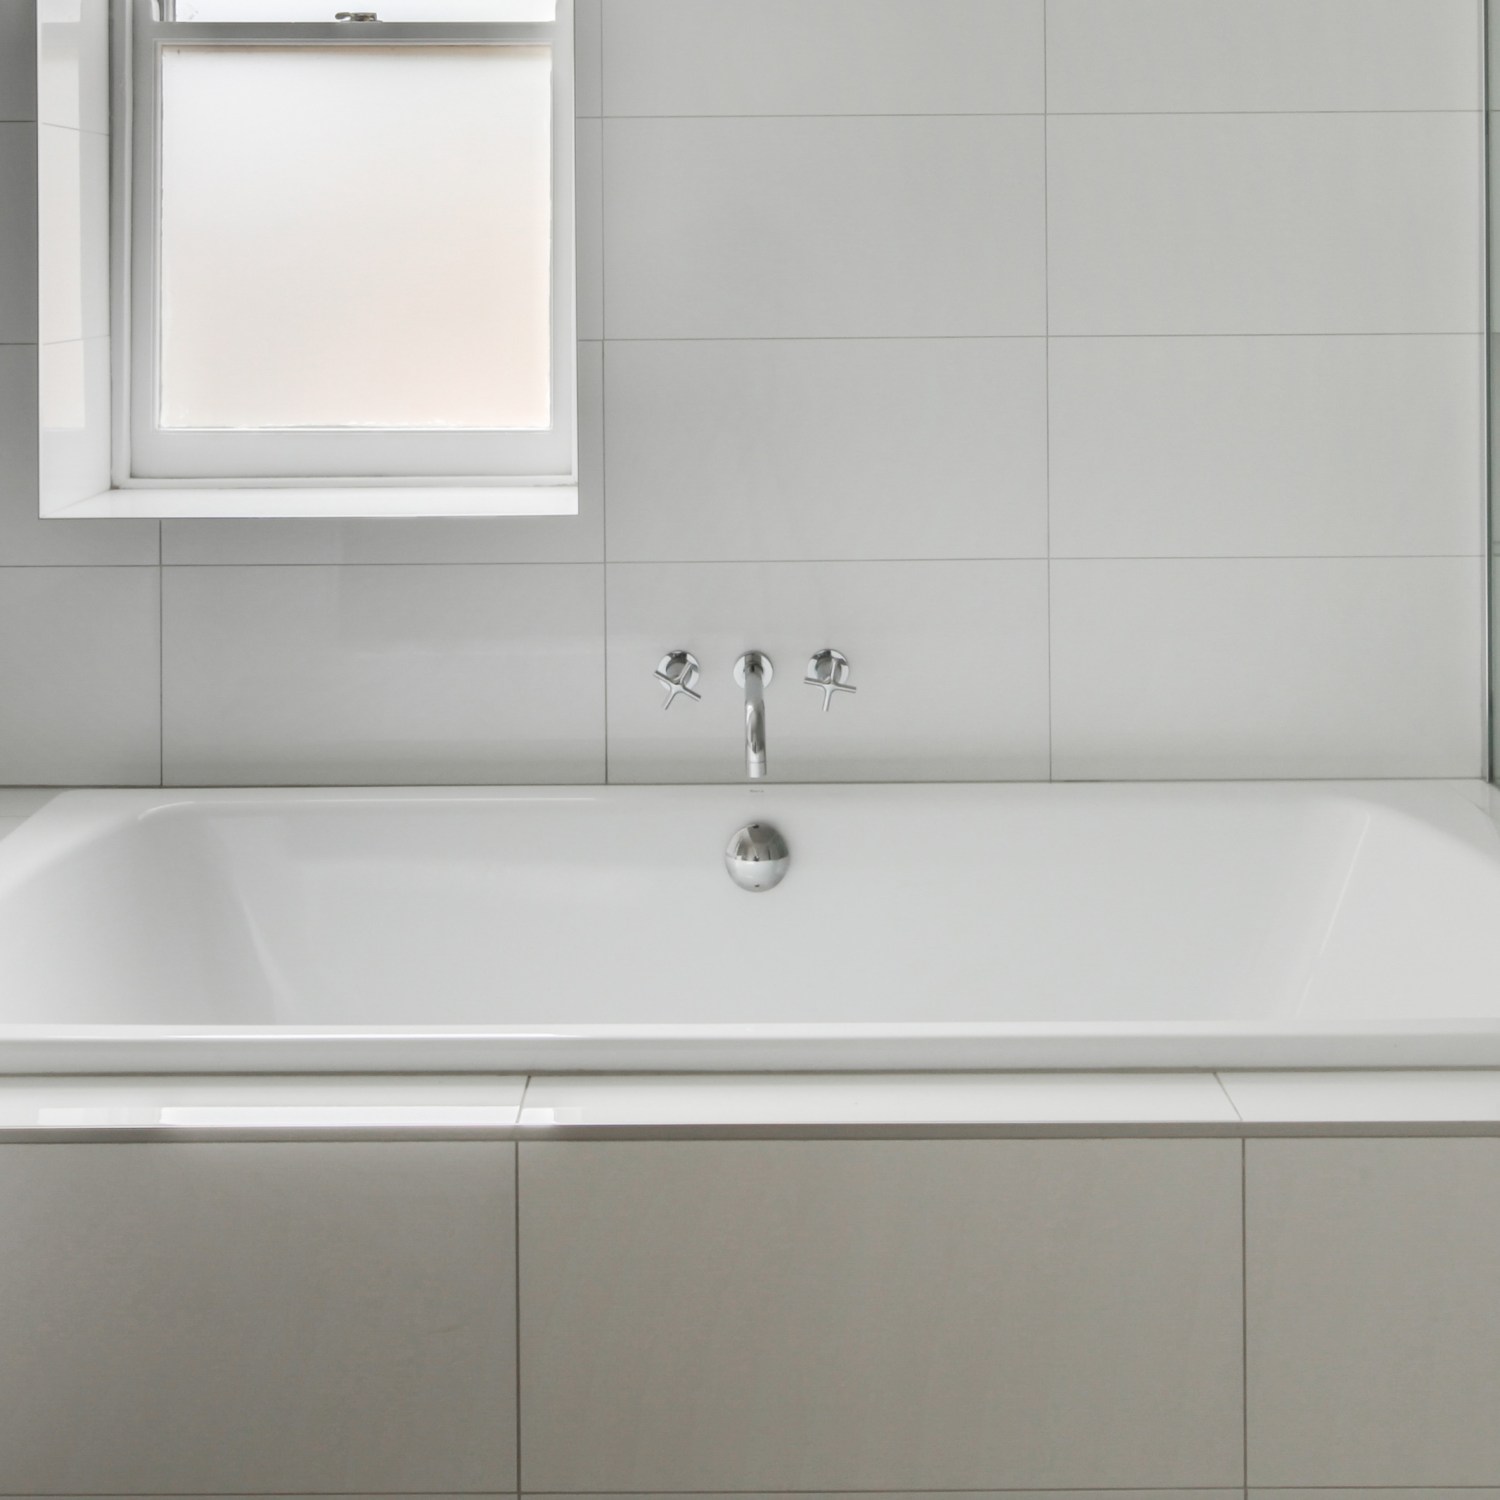 A stark, white tile bathroom with a tub and window